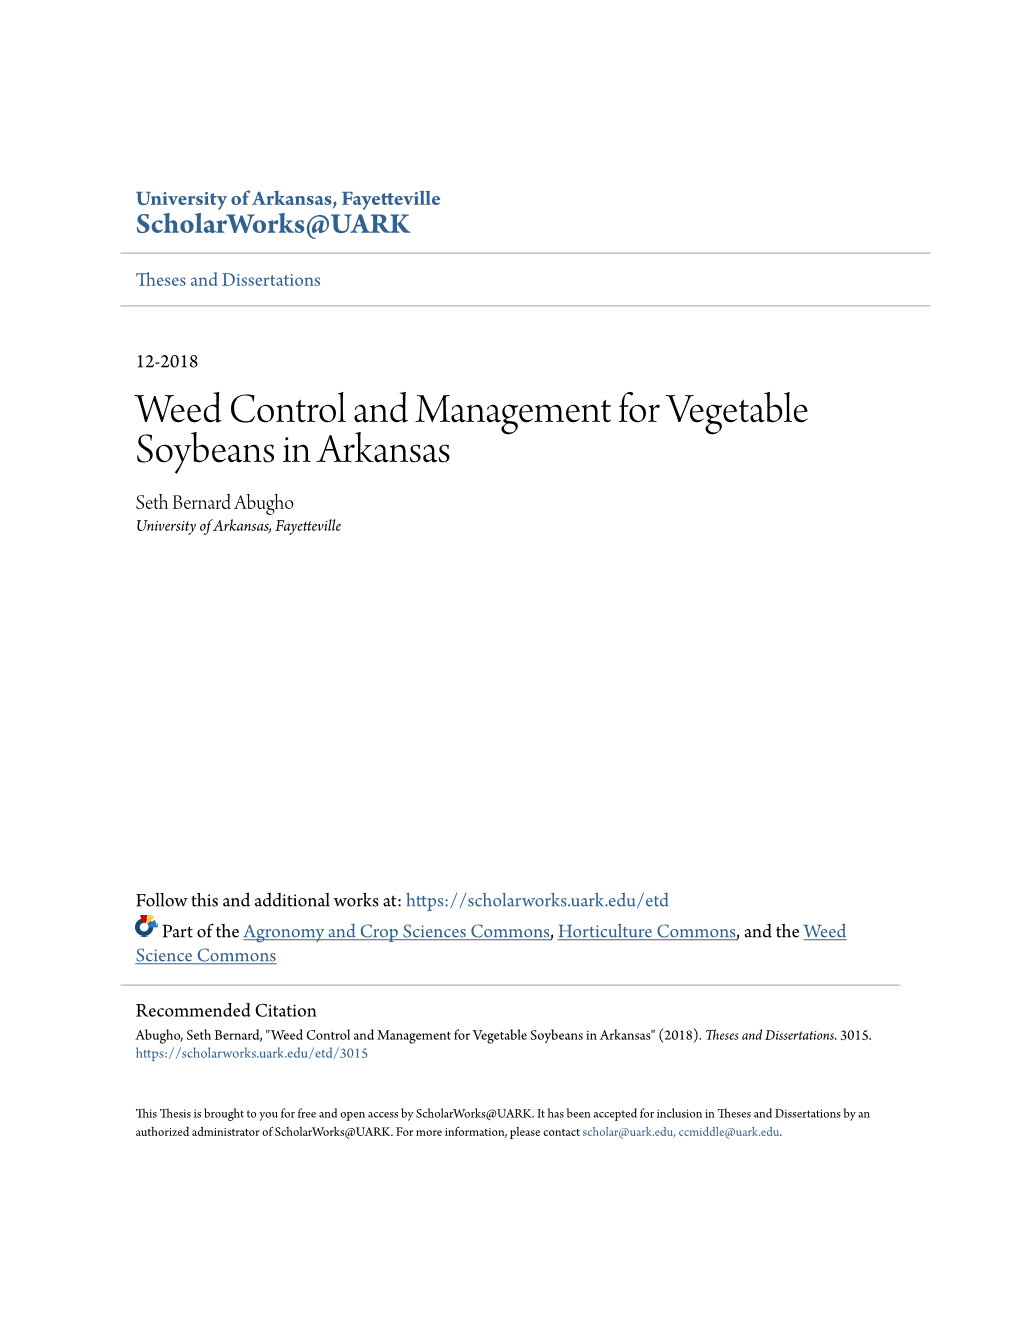 Weed Control and Management for Vegetable Soybeans in Arkansas Seth Bernard Abugho University of Arkansas, Fayetteville